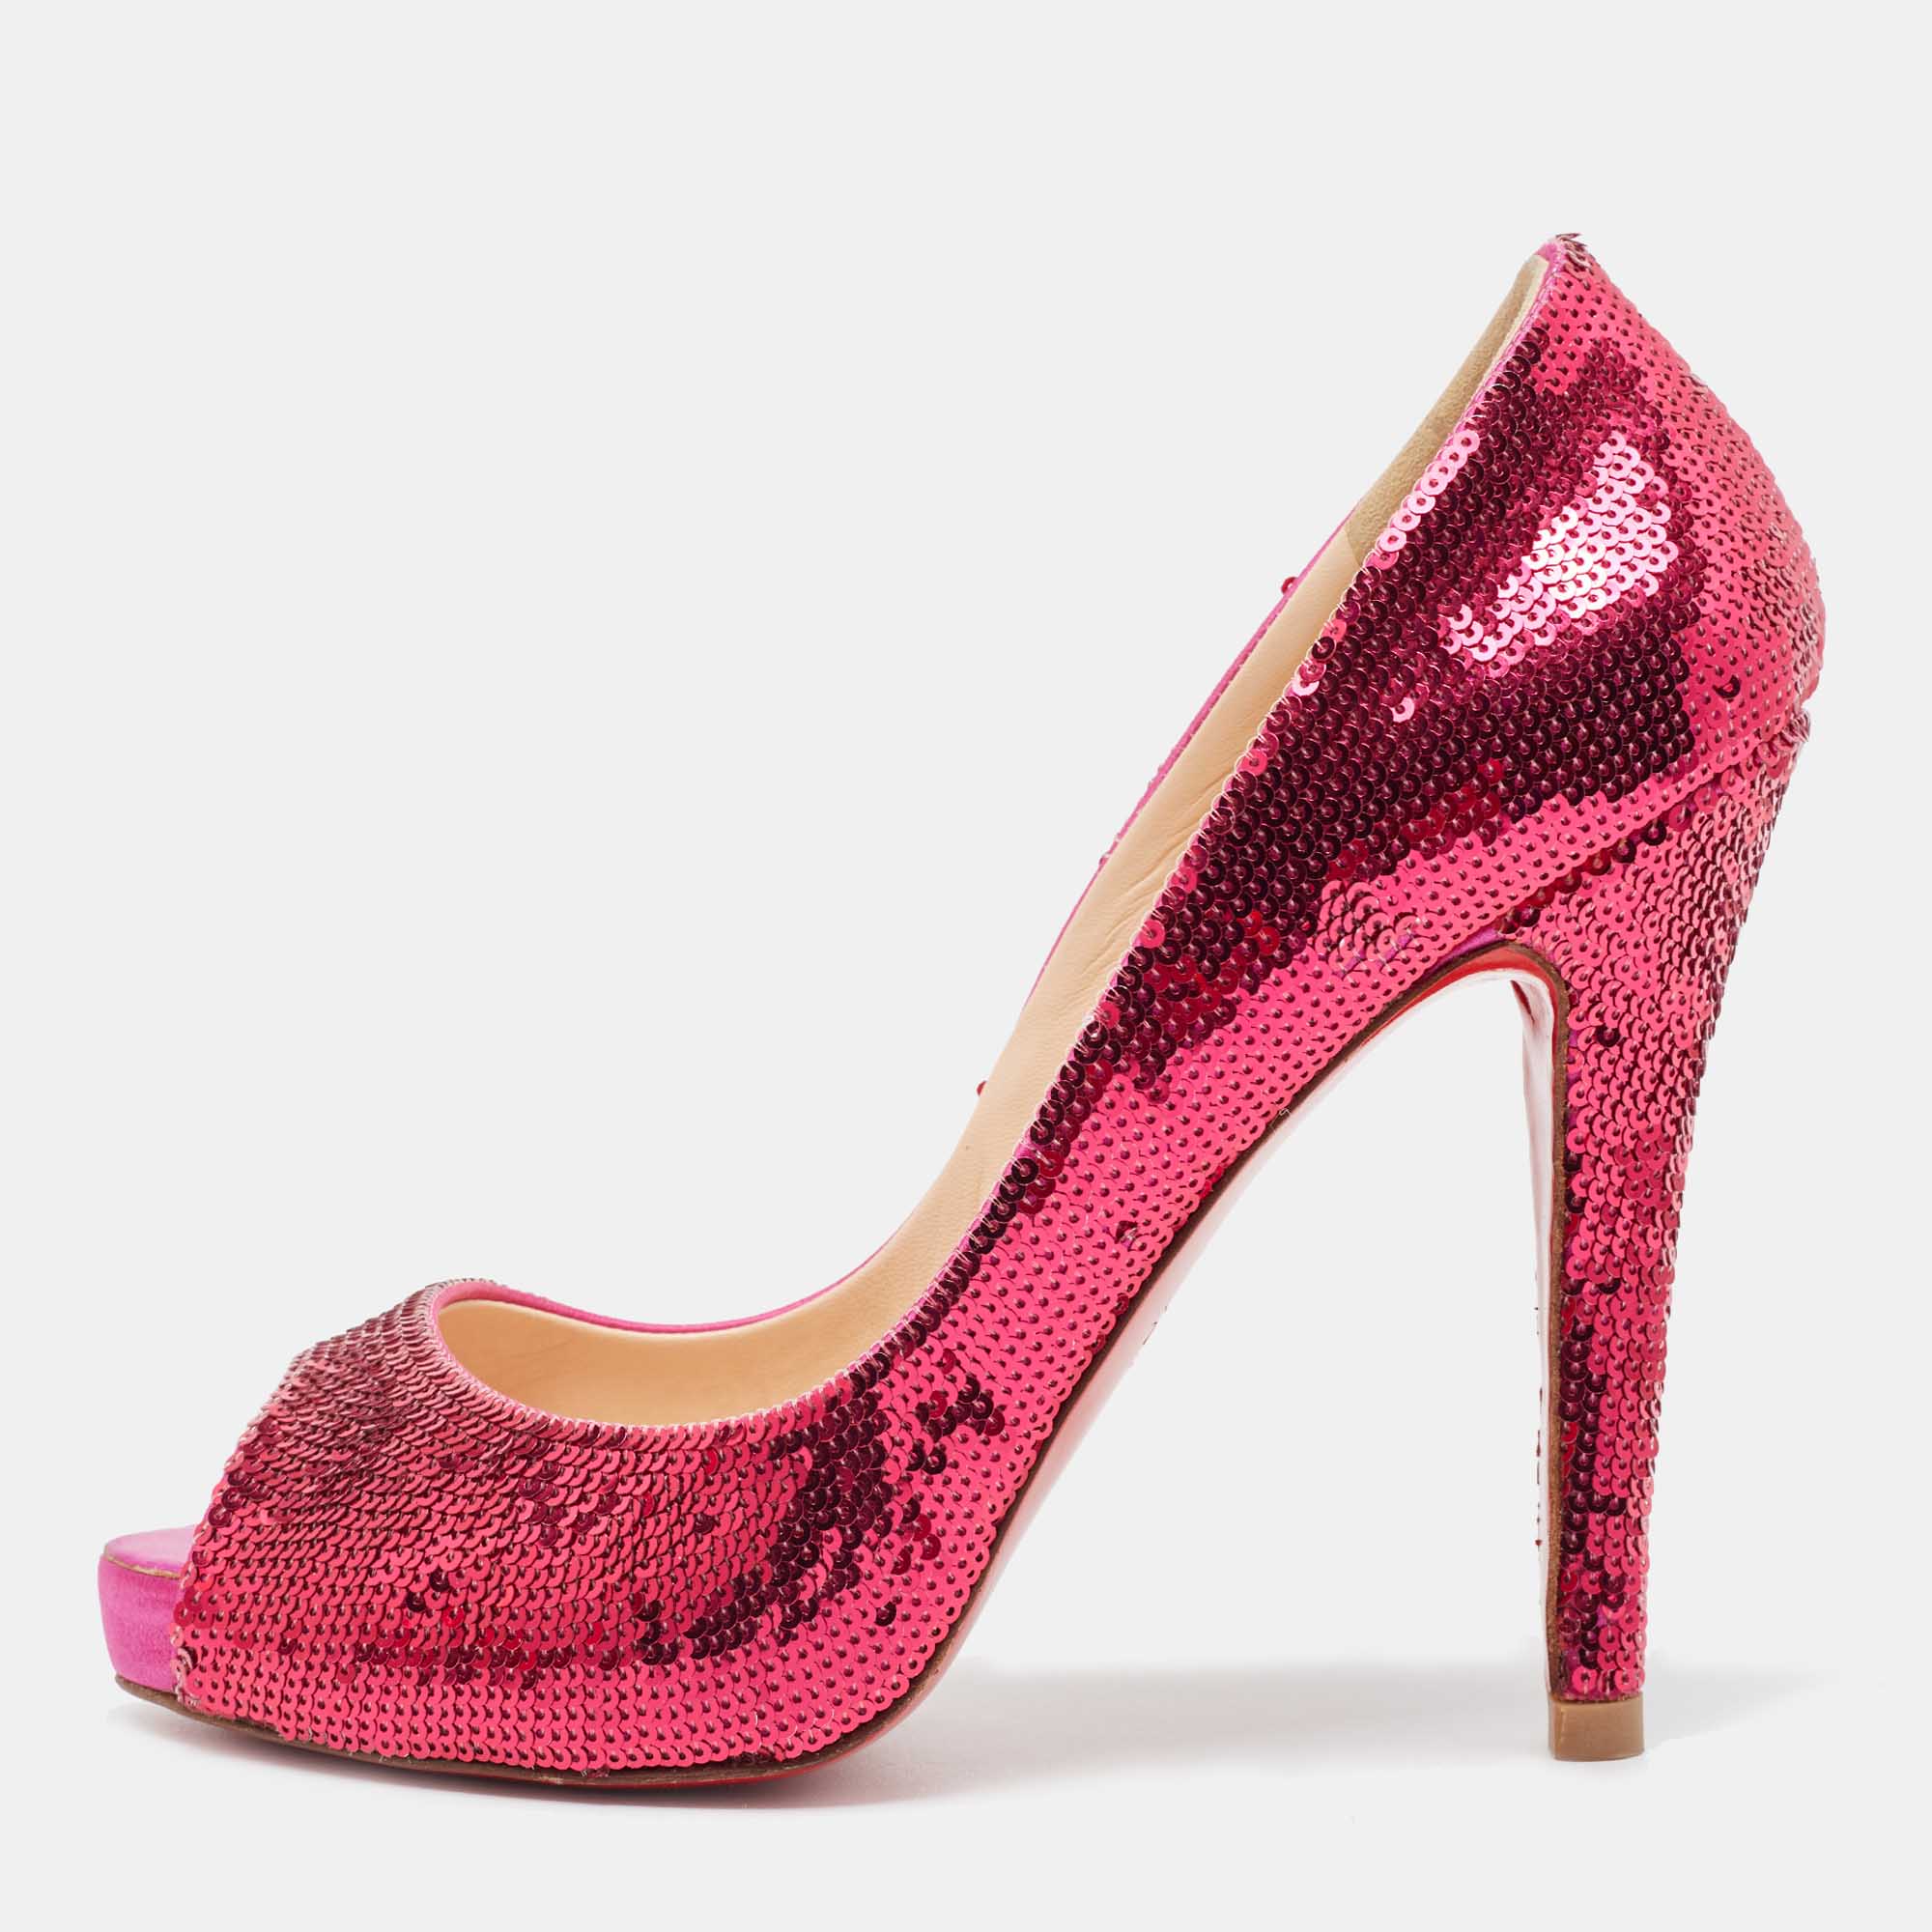 Christian louboutin pink sequin very prive pumps size 37